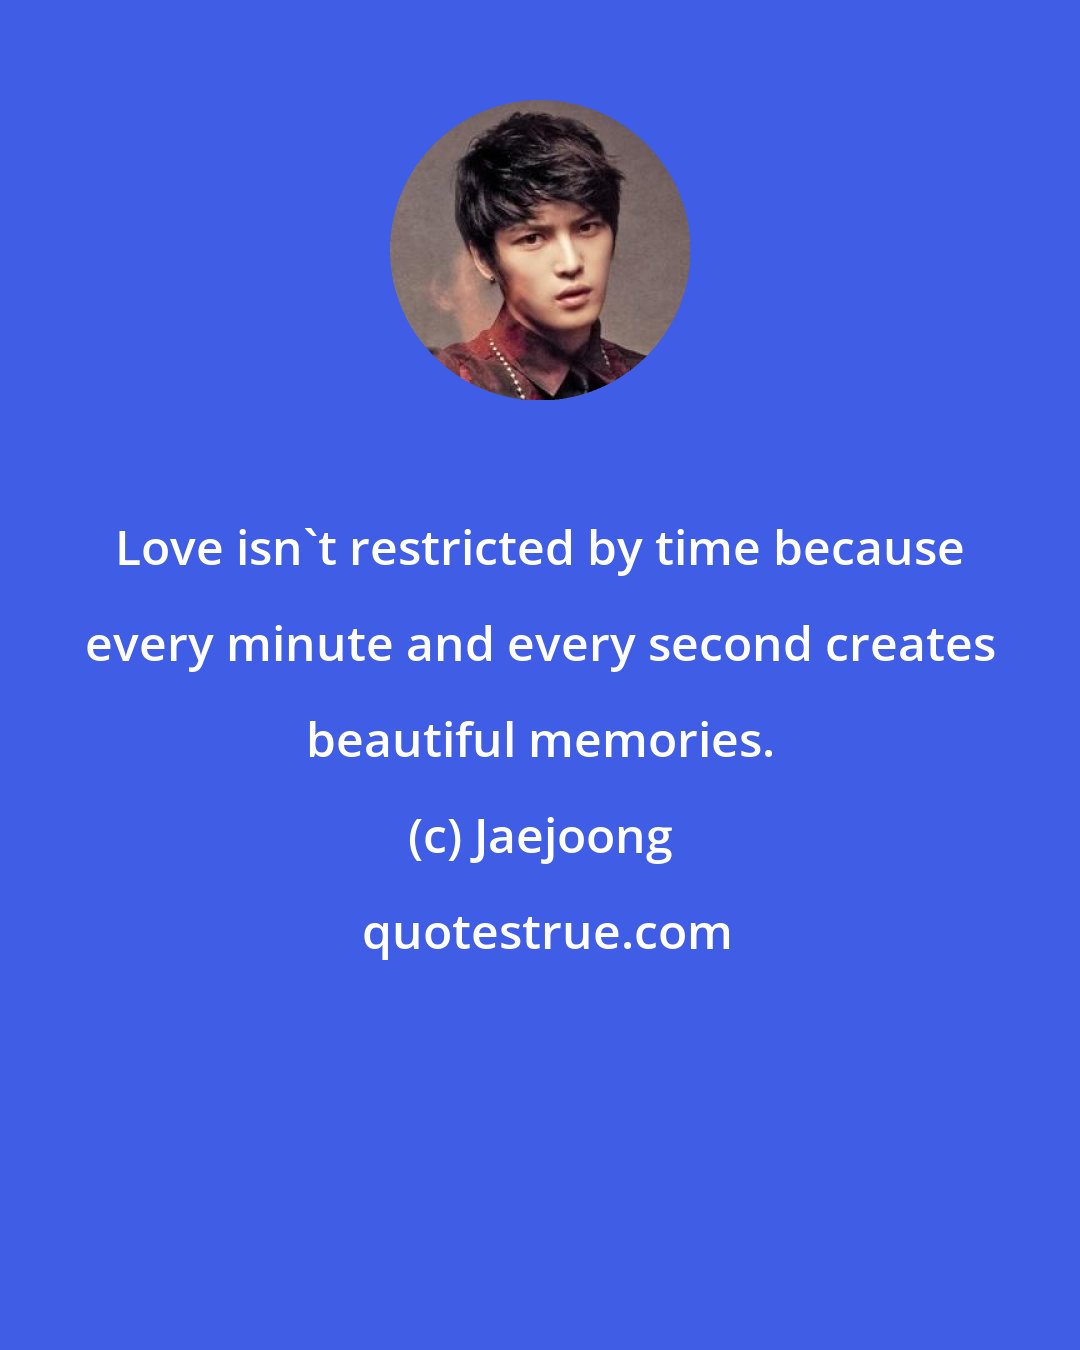 Jaejoong: Love isn't restricted by time because every minute and every second creates beautiful memories.